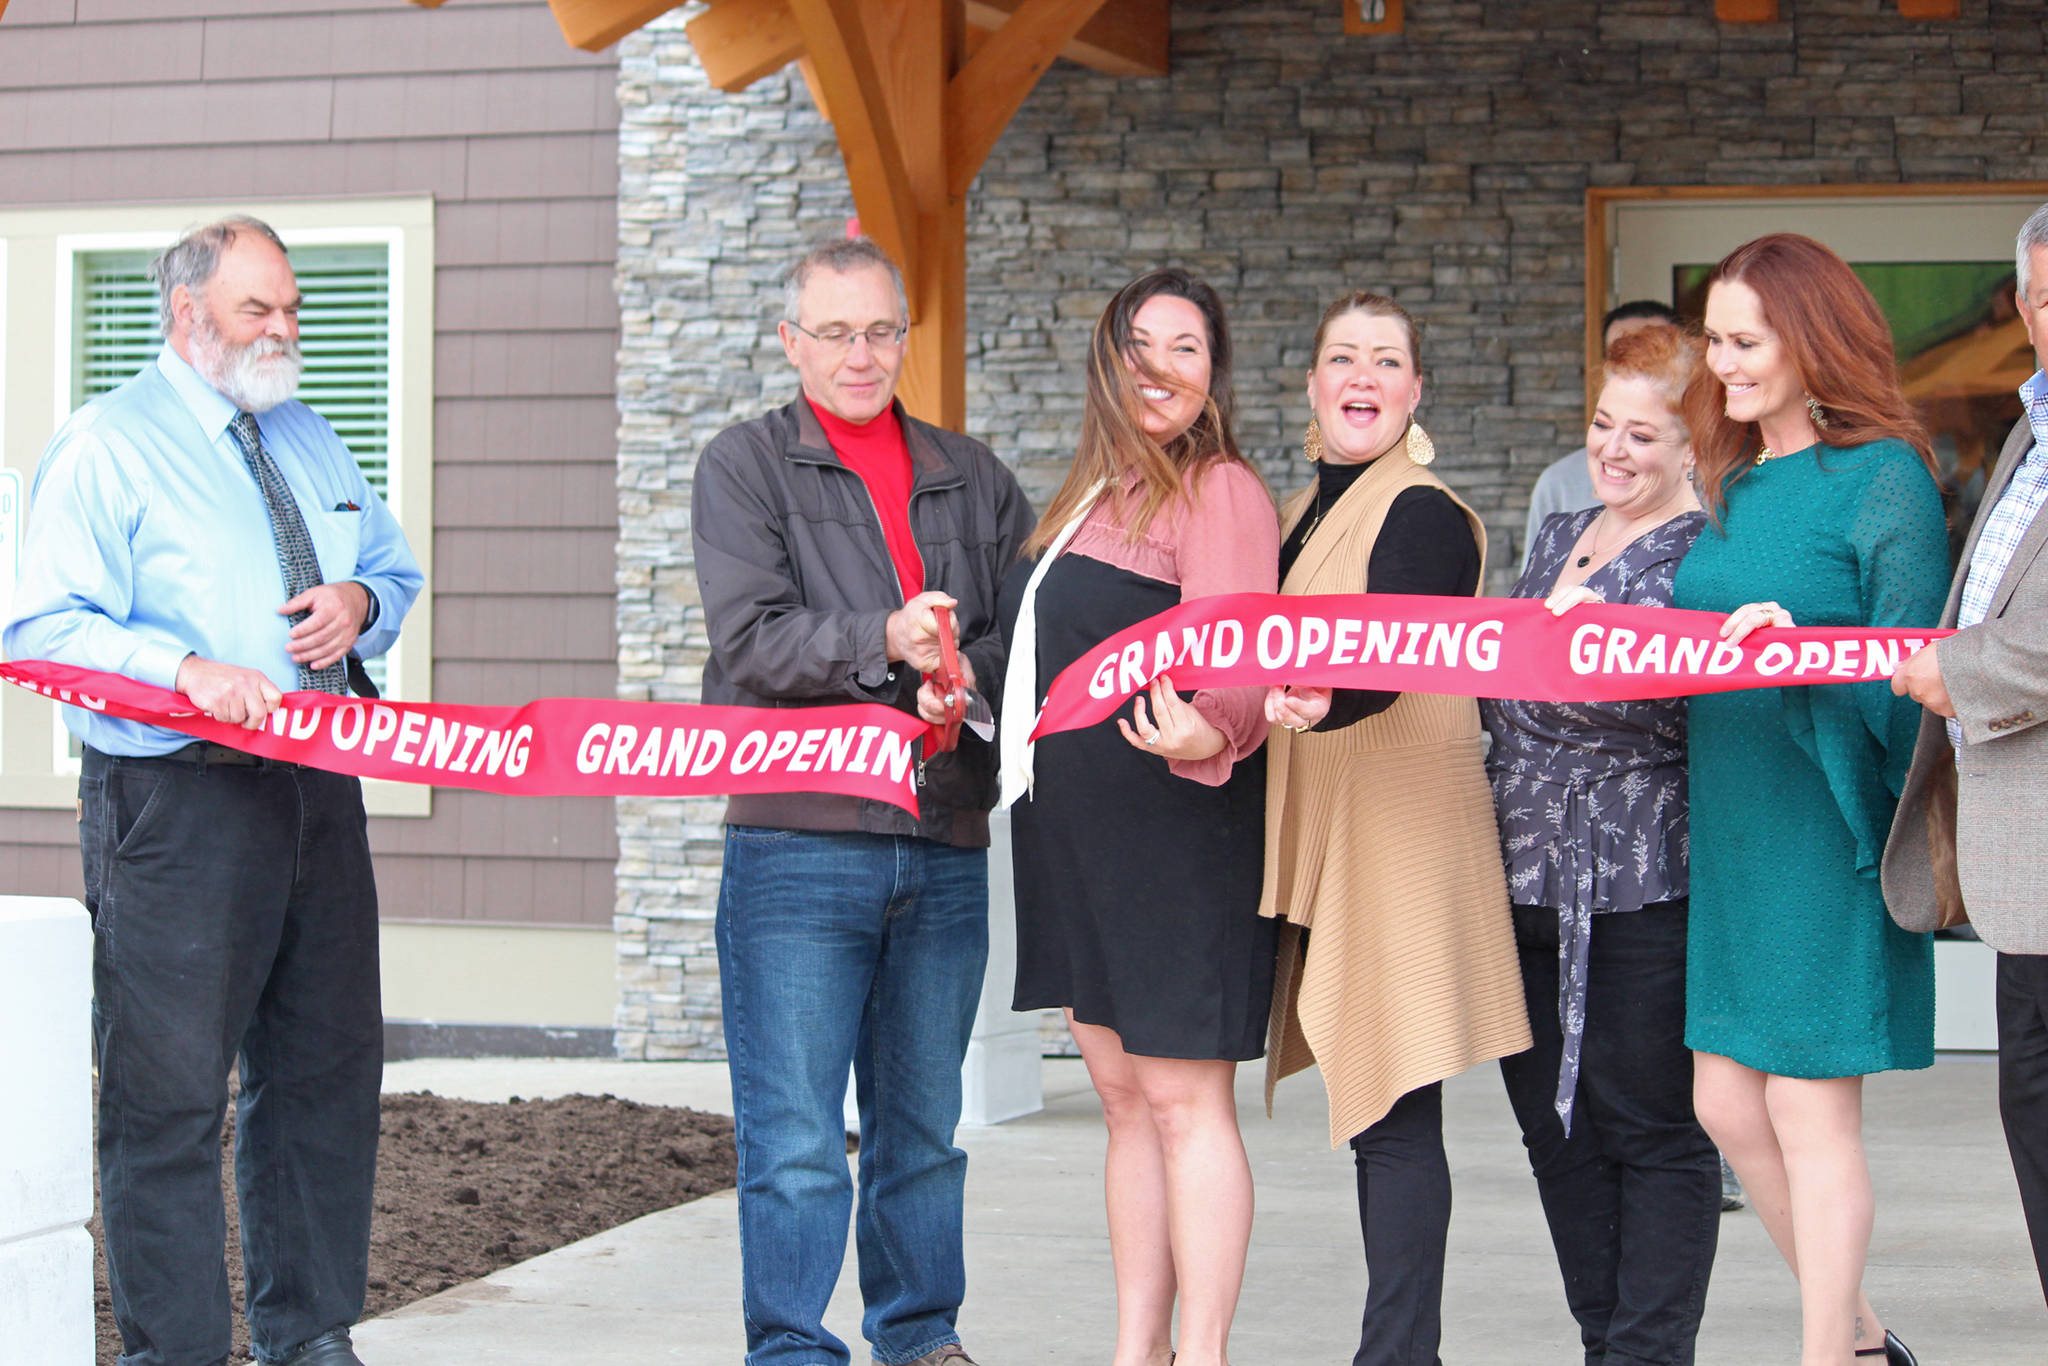 Aspen Hotel chain Owner George Swift cuts a ribbon officially opening the most recent building in Homer, Alaska, during a grand opening ceremony on May 29, 2019. (Photo by Megan Pacer/Homer News)